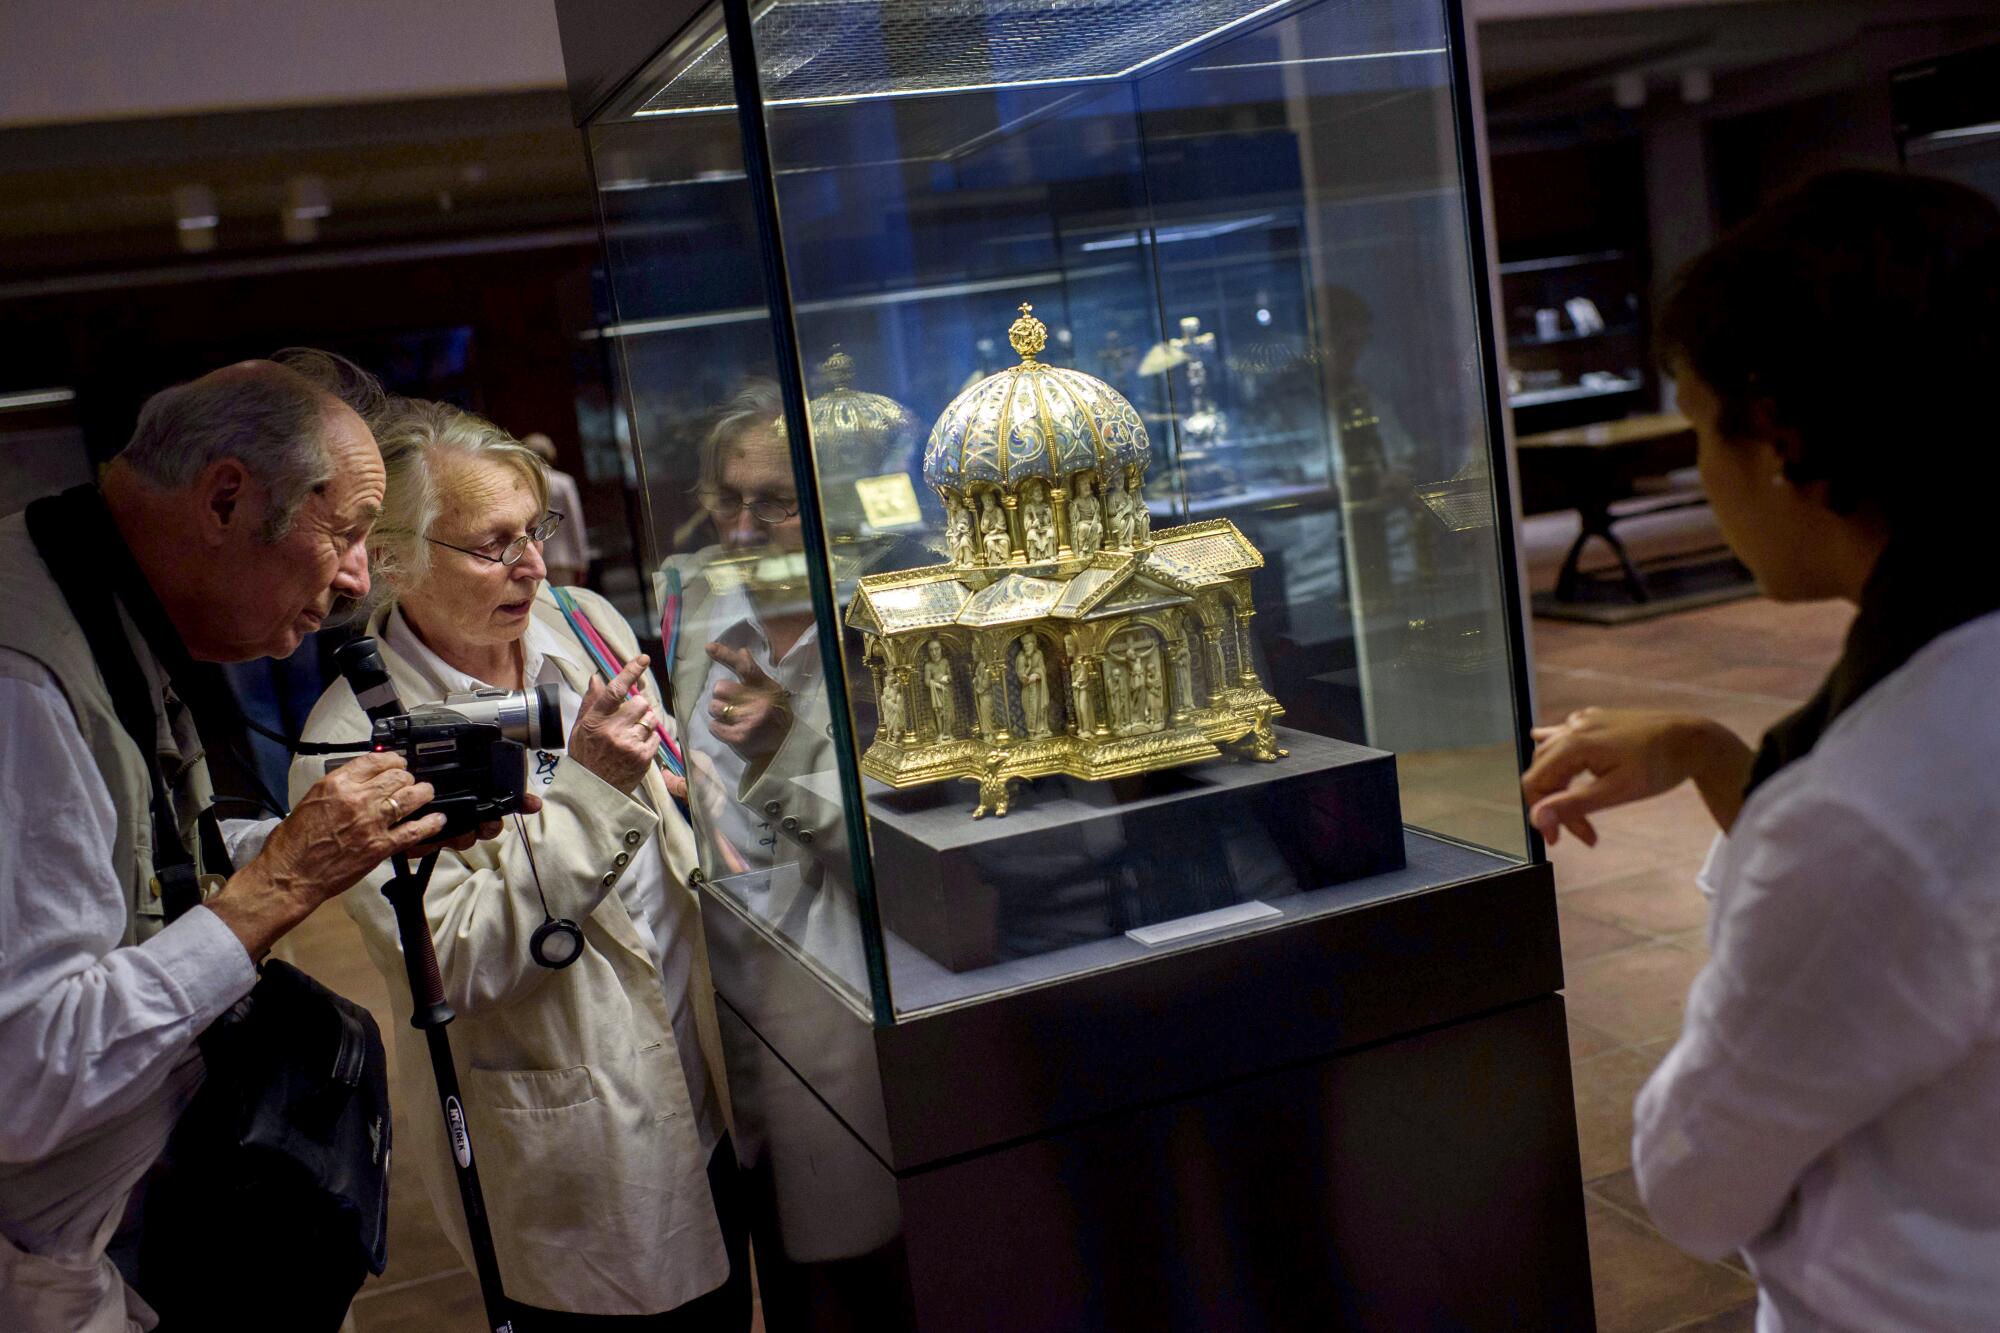 Visitors view a piece from the Guelph Treasure at the Kunstgewerbemuseum in Berlin in 2017.